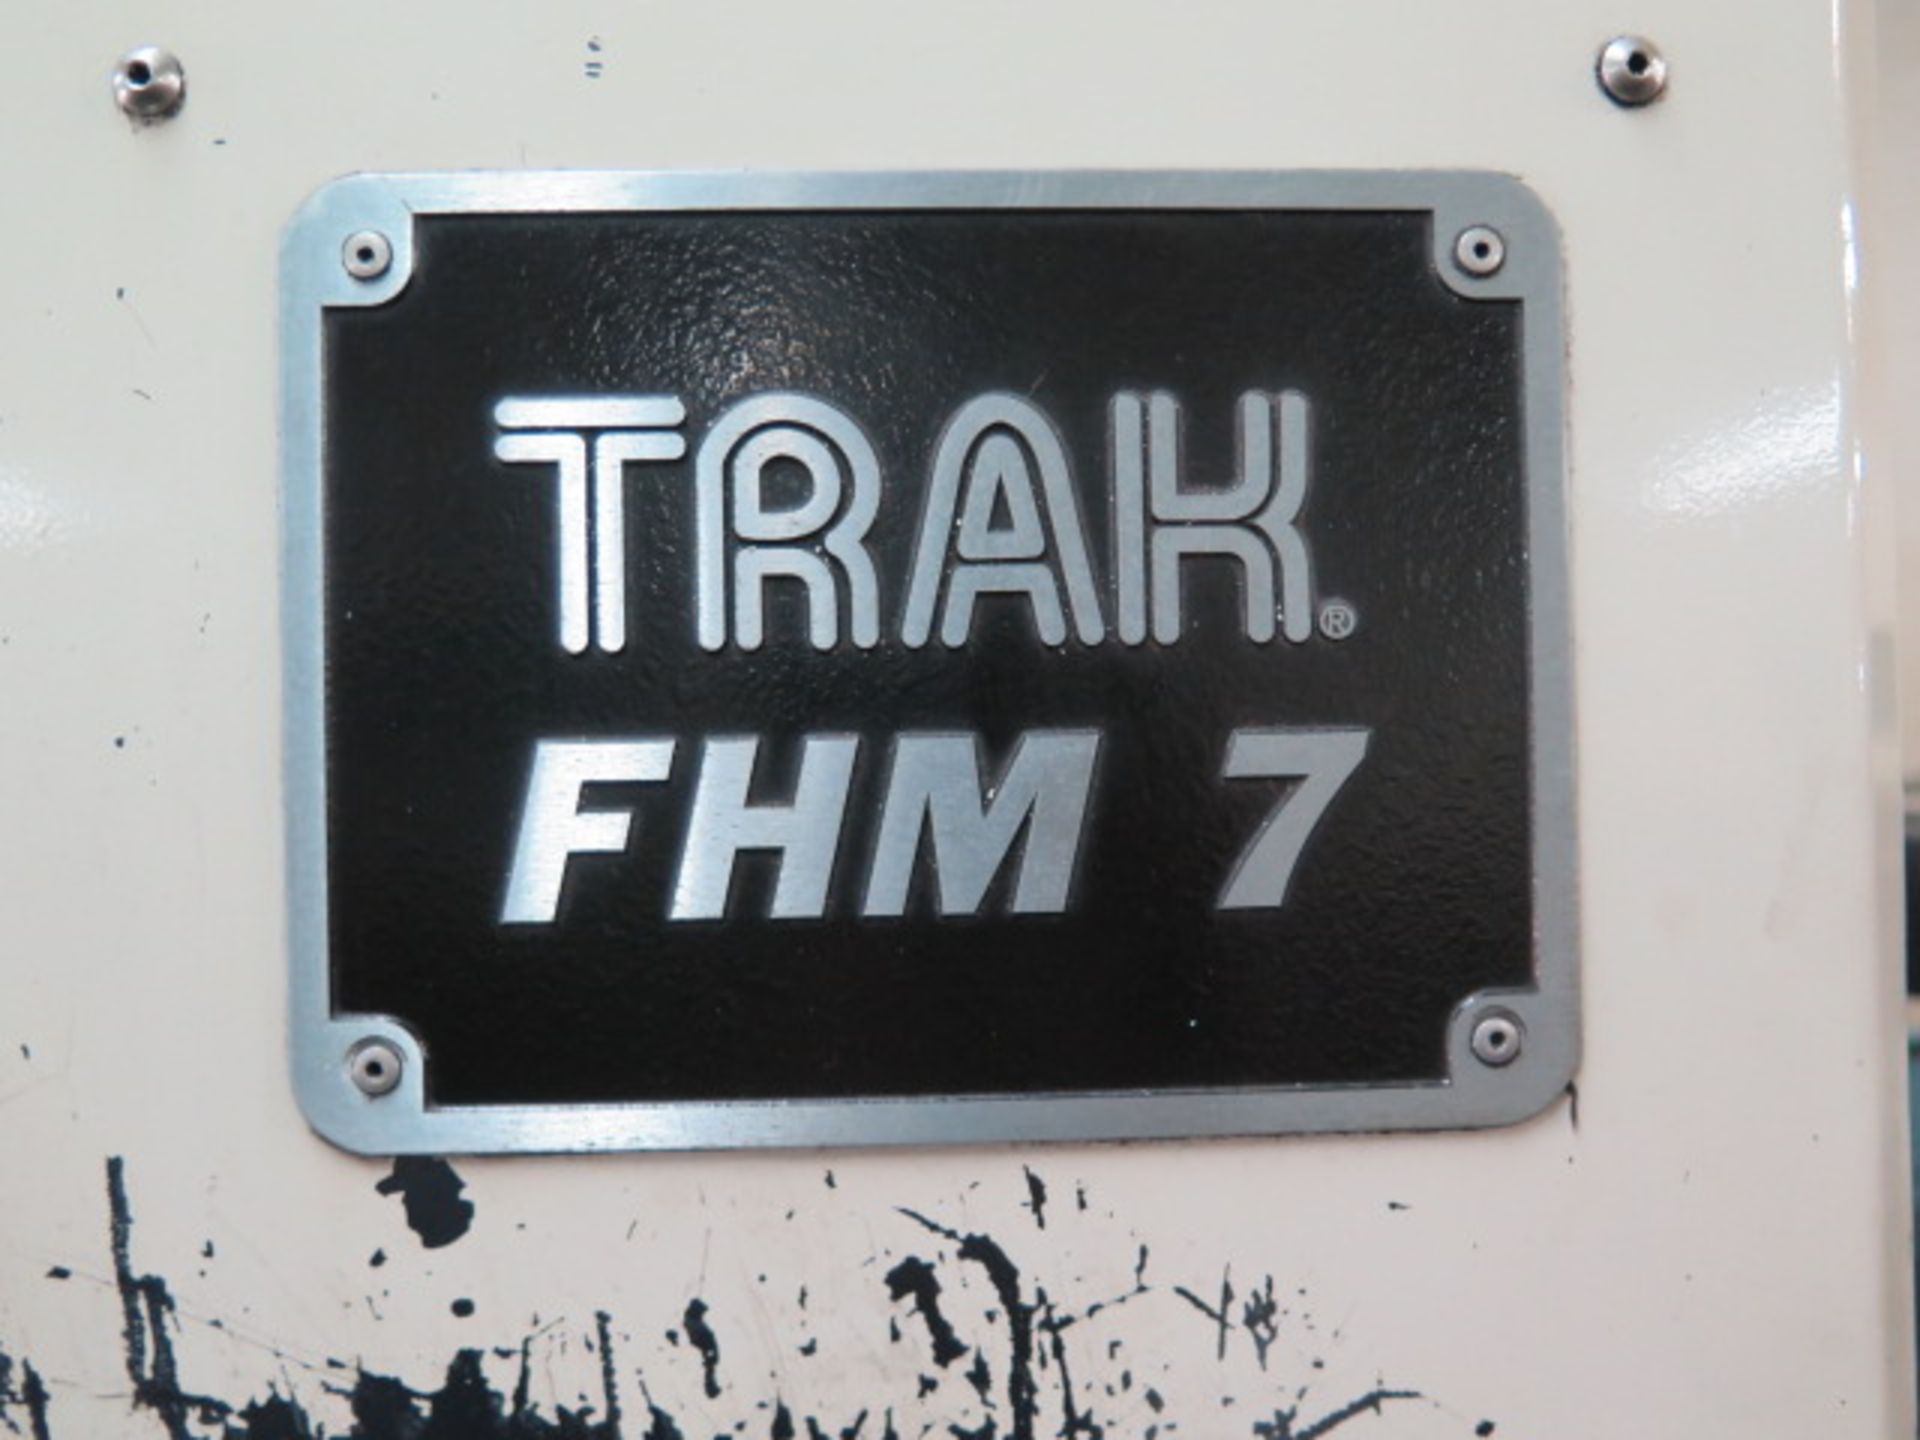 Trak FHM 7 CNC Vertical Machining Center s/n 124CY453188 w/ Proto Trak SMX Controls, SOLD AS IS - Image 4 of 20